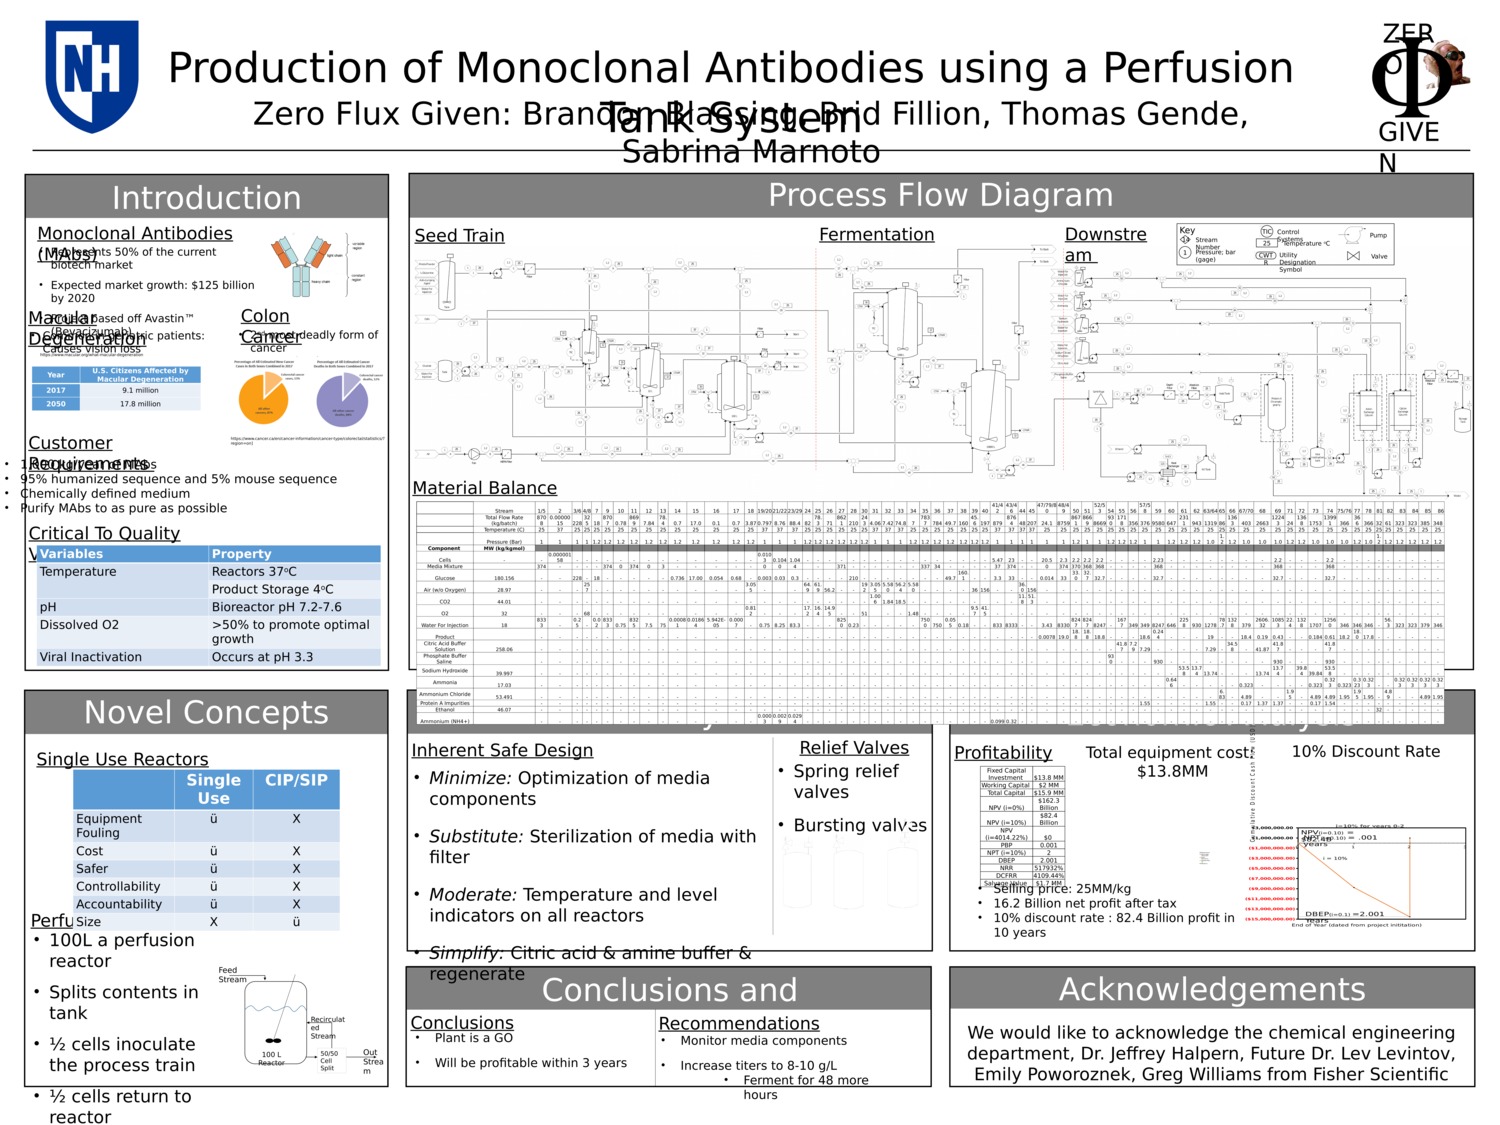 Production Of Monoclonal Antibodies Using A Perfusion Reactor by smm1007